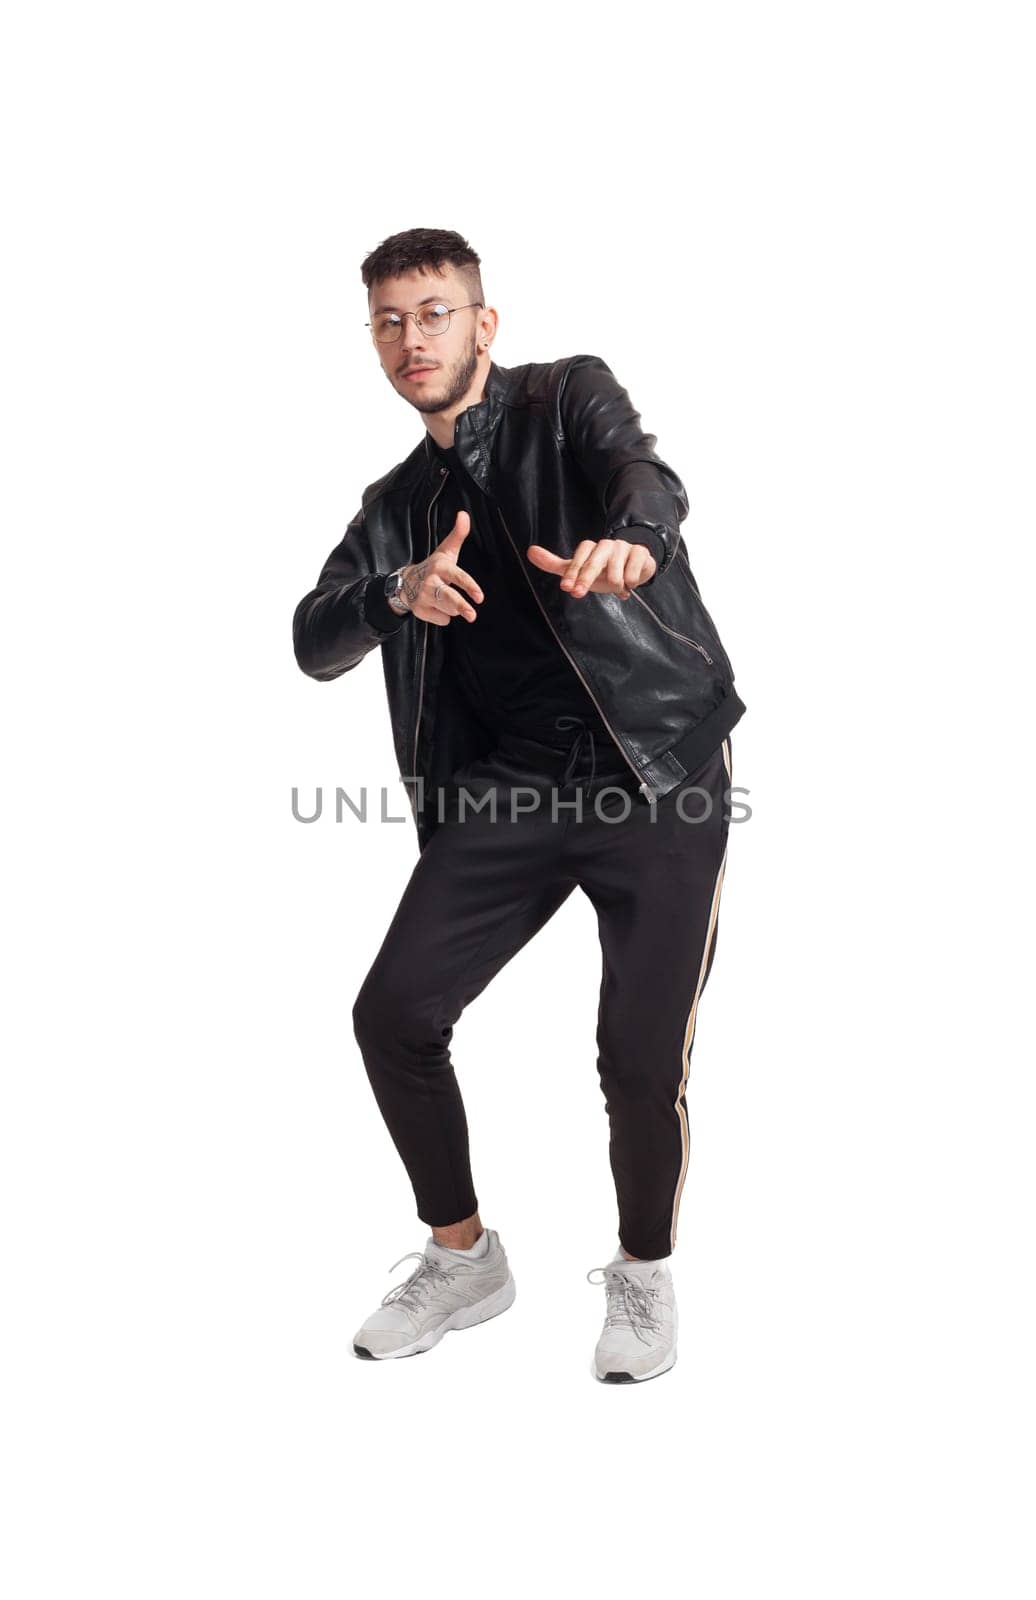 Full-length photo of a modern performer in glasses, black leather jacket, t-shirt, sports pants and light sneakers fooling around and gesticulating in studio. Indoor photo of a mischievous person dancing isolated on white background. Music and imagination.